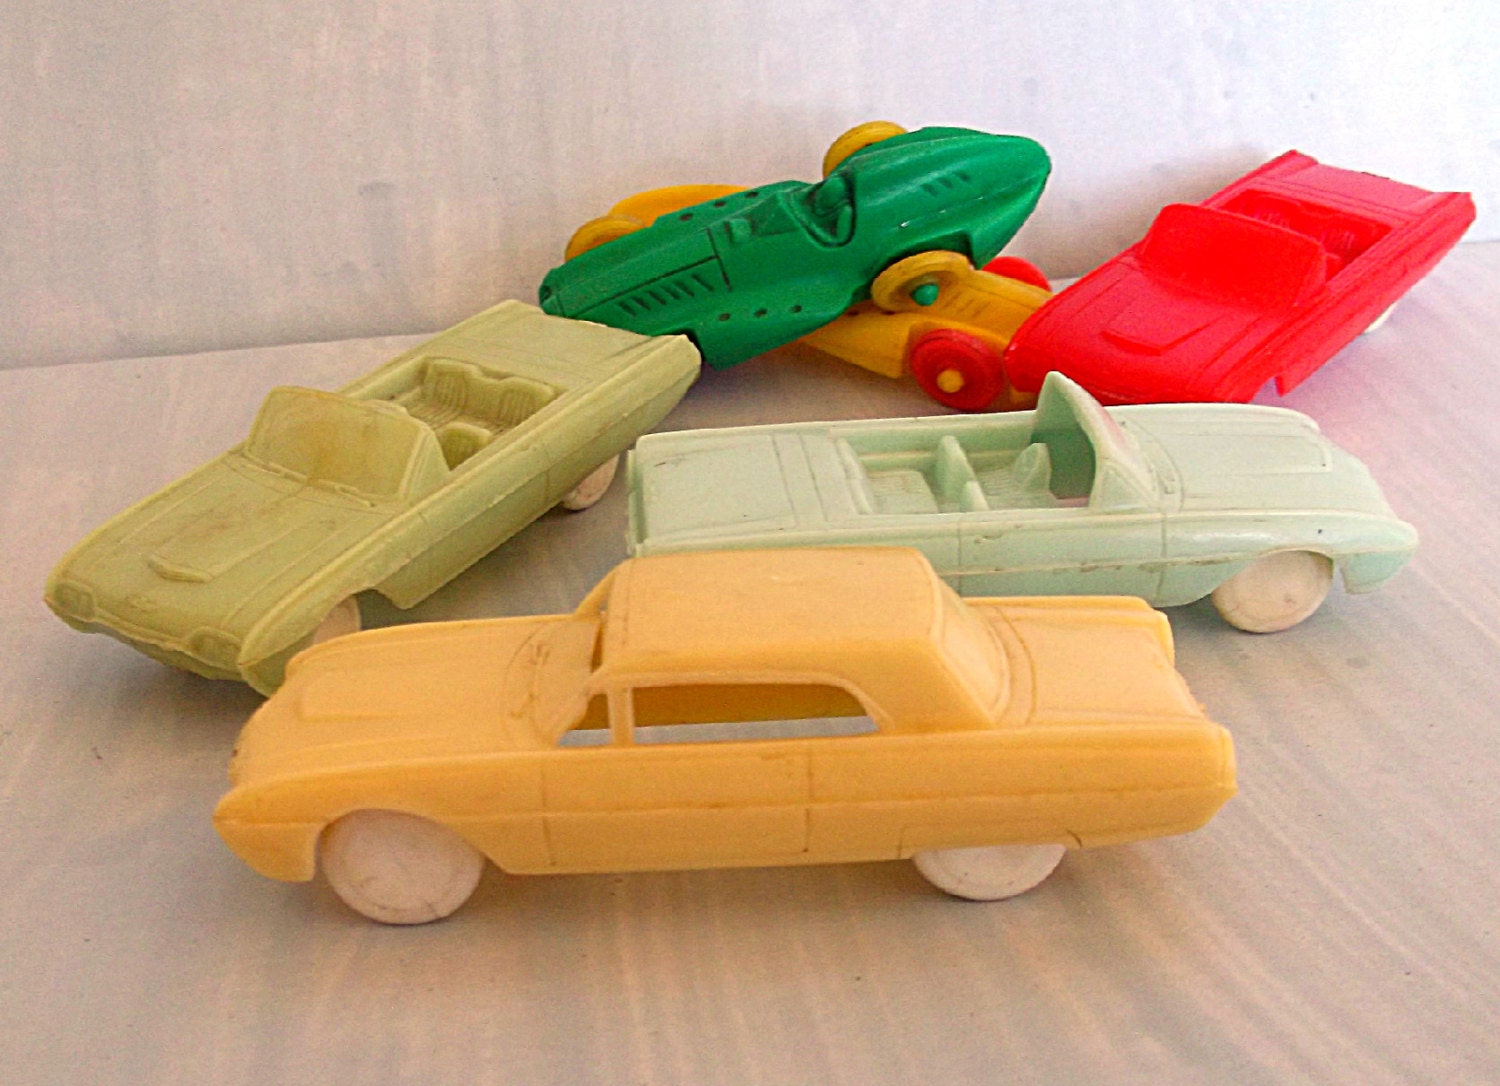 Vintage Plastic Toy Cars Mold and Die Works Cereal by